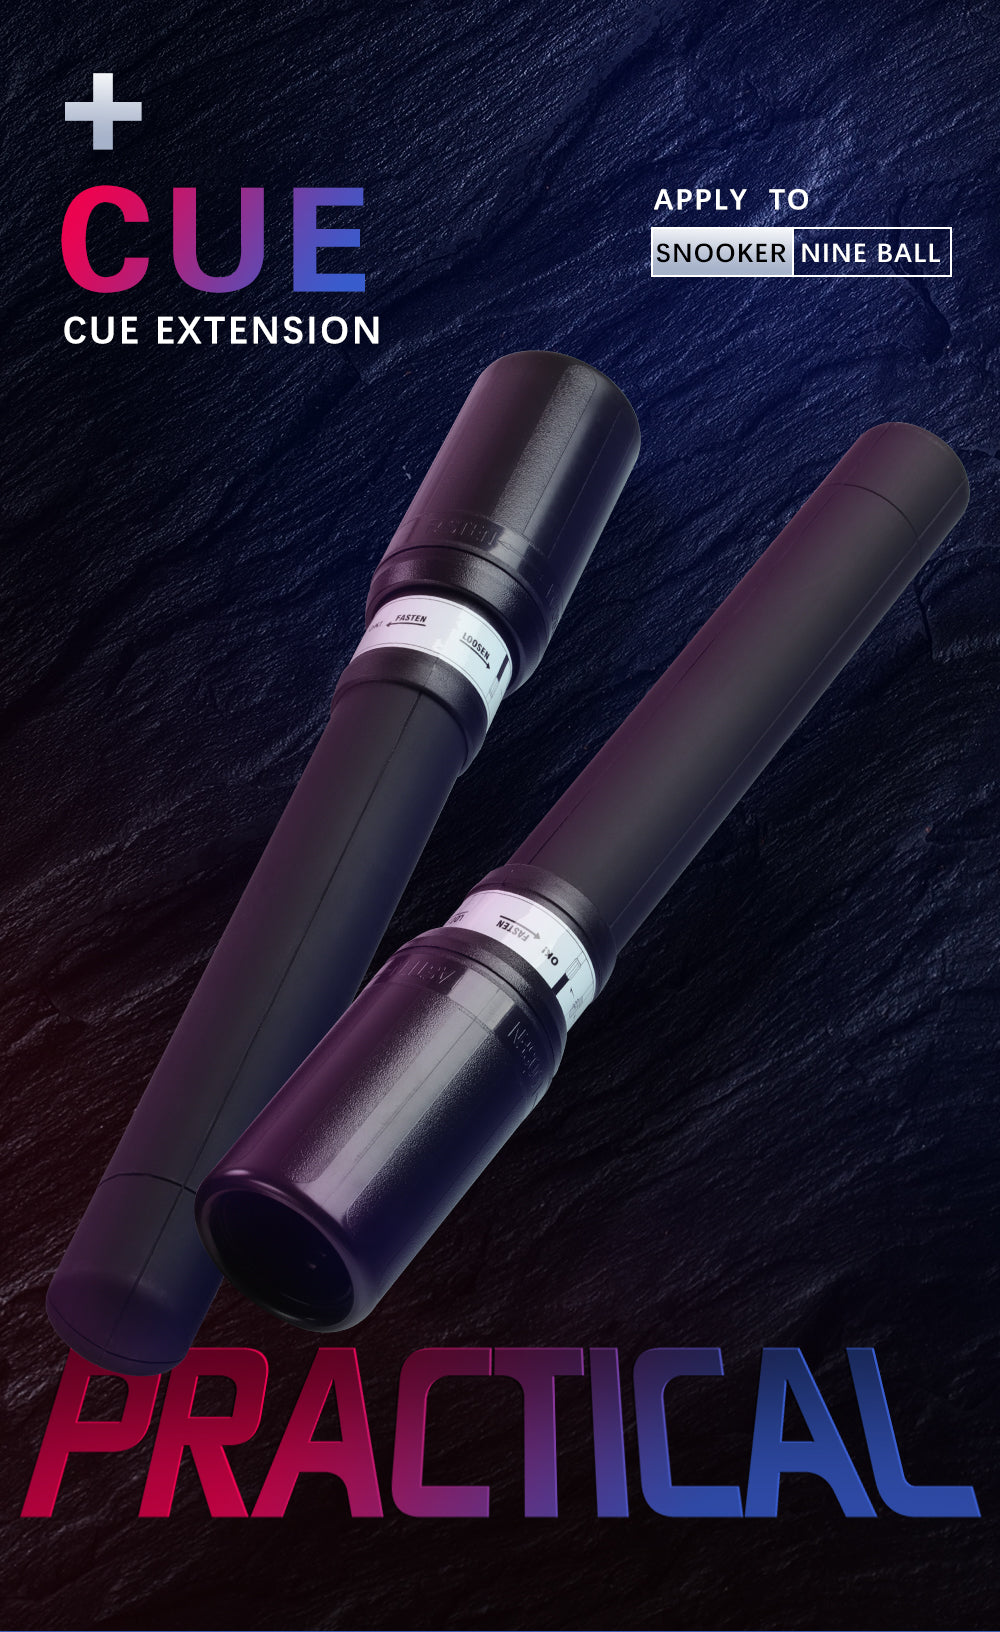 Cue Extension Extender for Pool Cue or Snooker Cue Black White Durable Non Slip Universal Extension Billiards Accessories